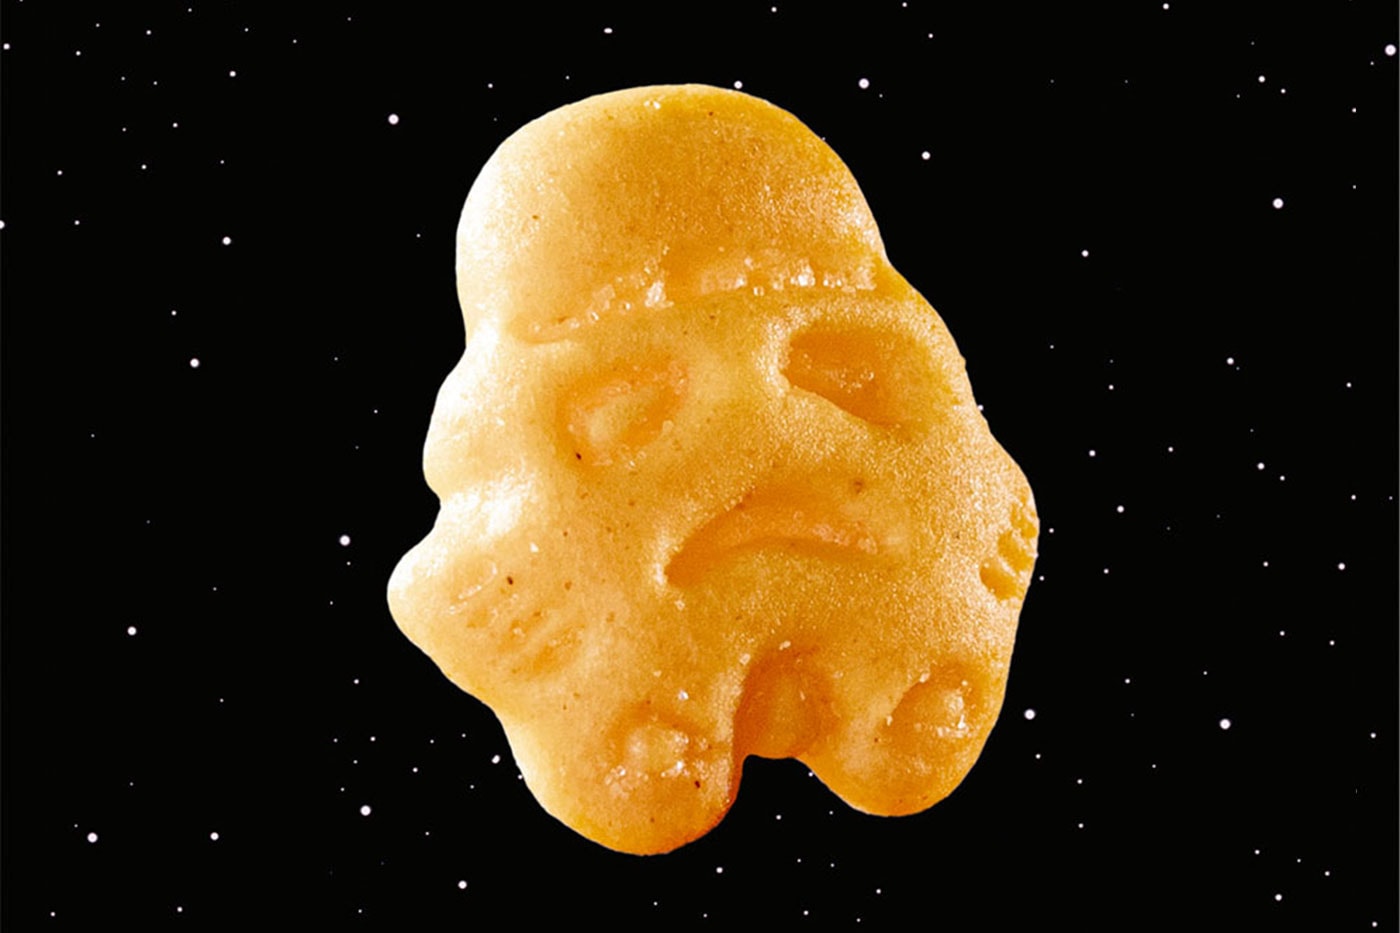 Goldfish Limited Edition Star Wars The Mandalorian Cheddar Crackers Release Buy Price Info Grogu Stormtroopers